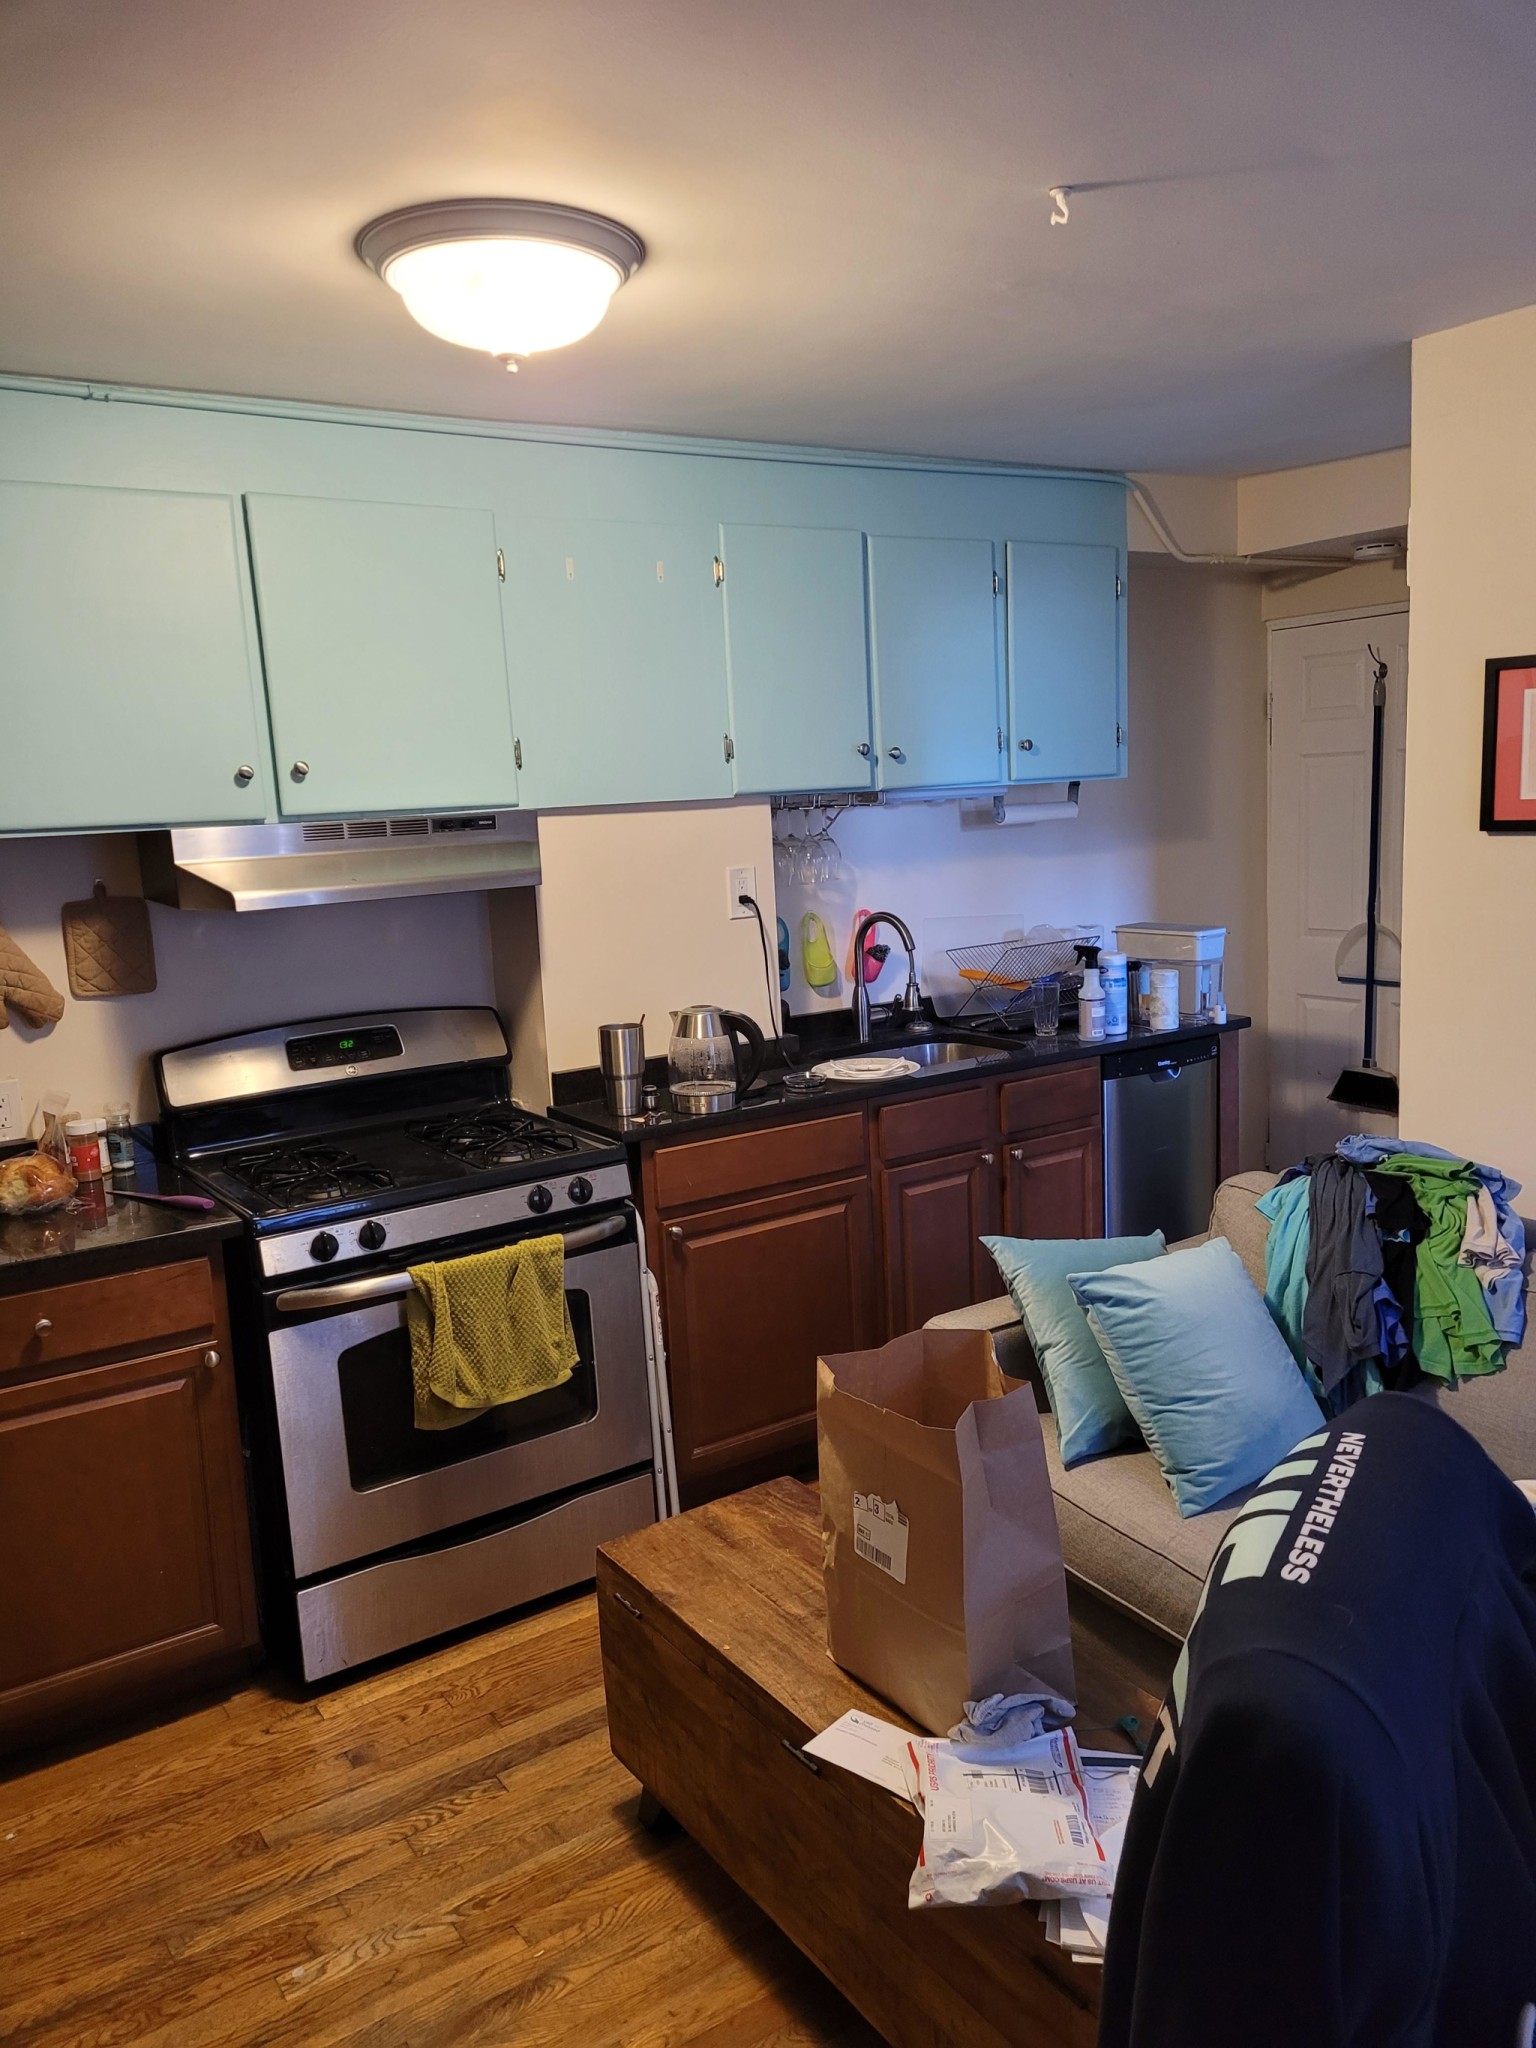 Photos of apartment on McGrath Highway,Somerville MA 02143